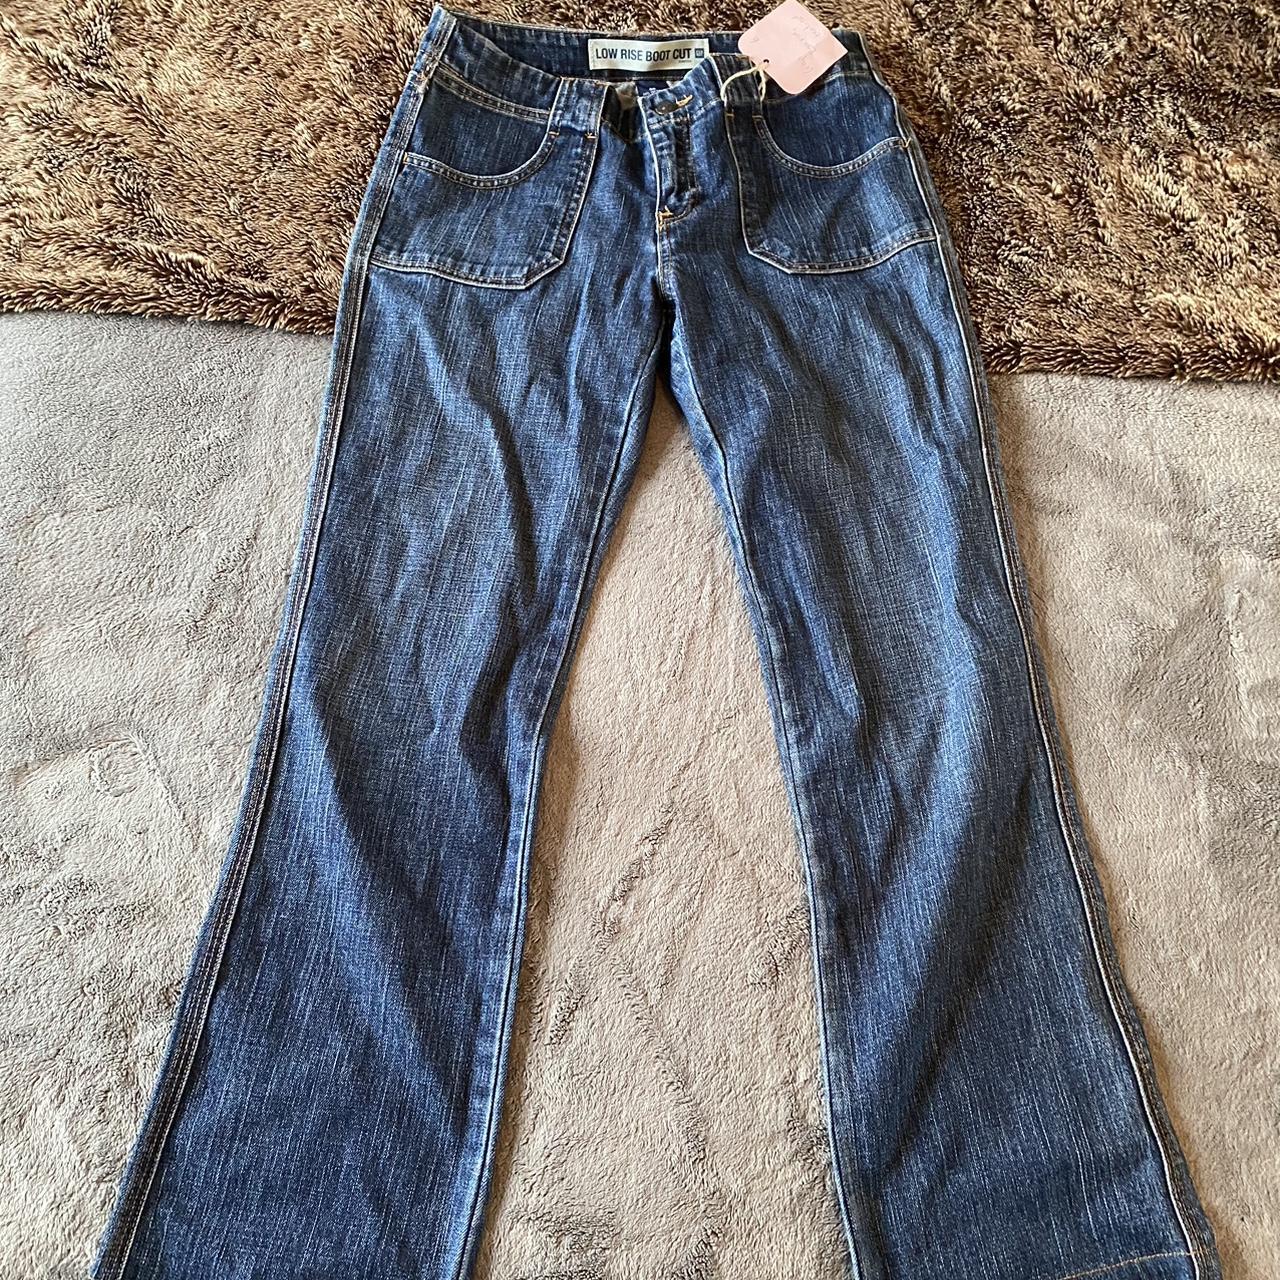 Gap low rise boot cut jeans labelled as 6r best for... - Depop